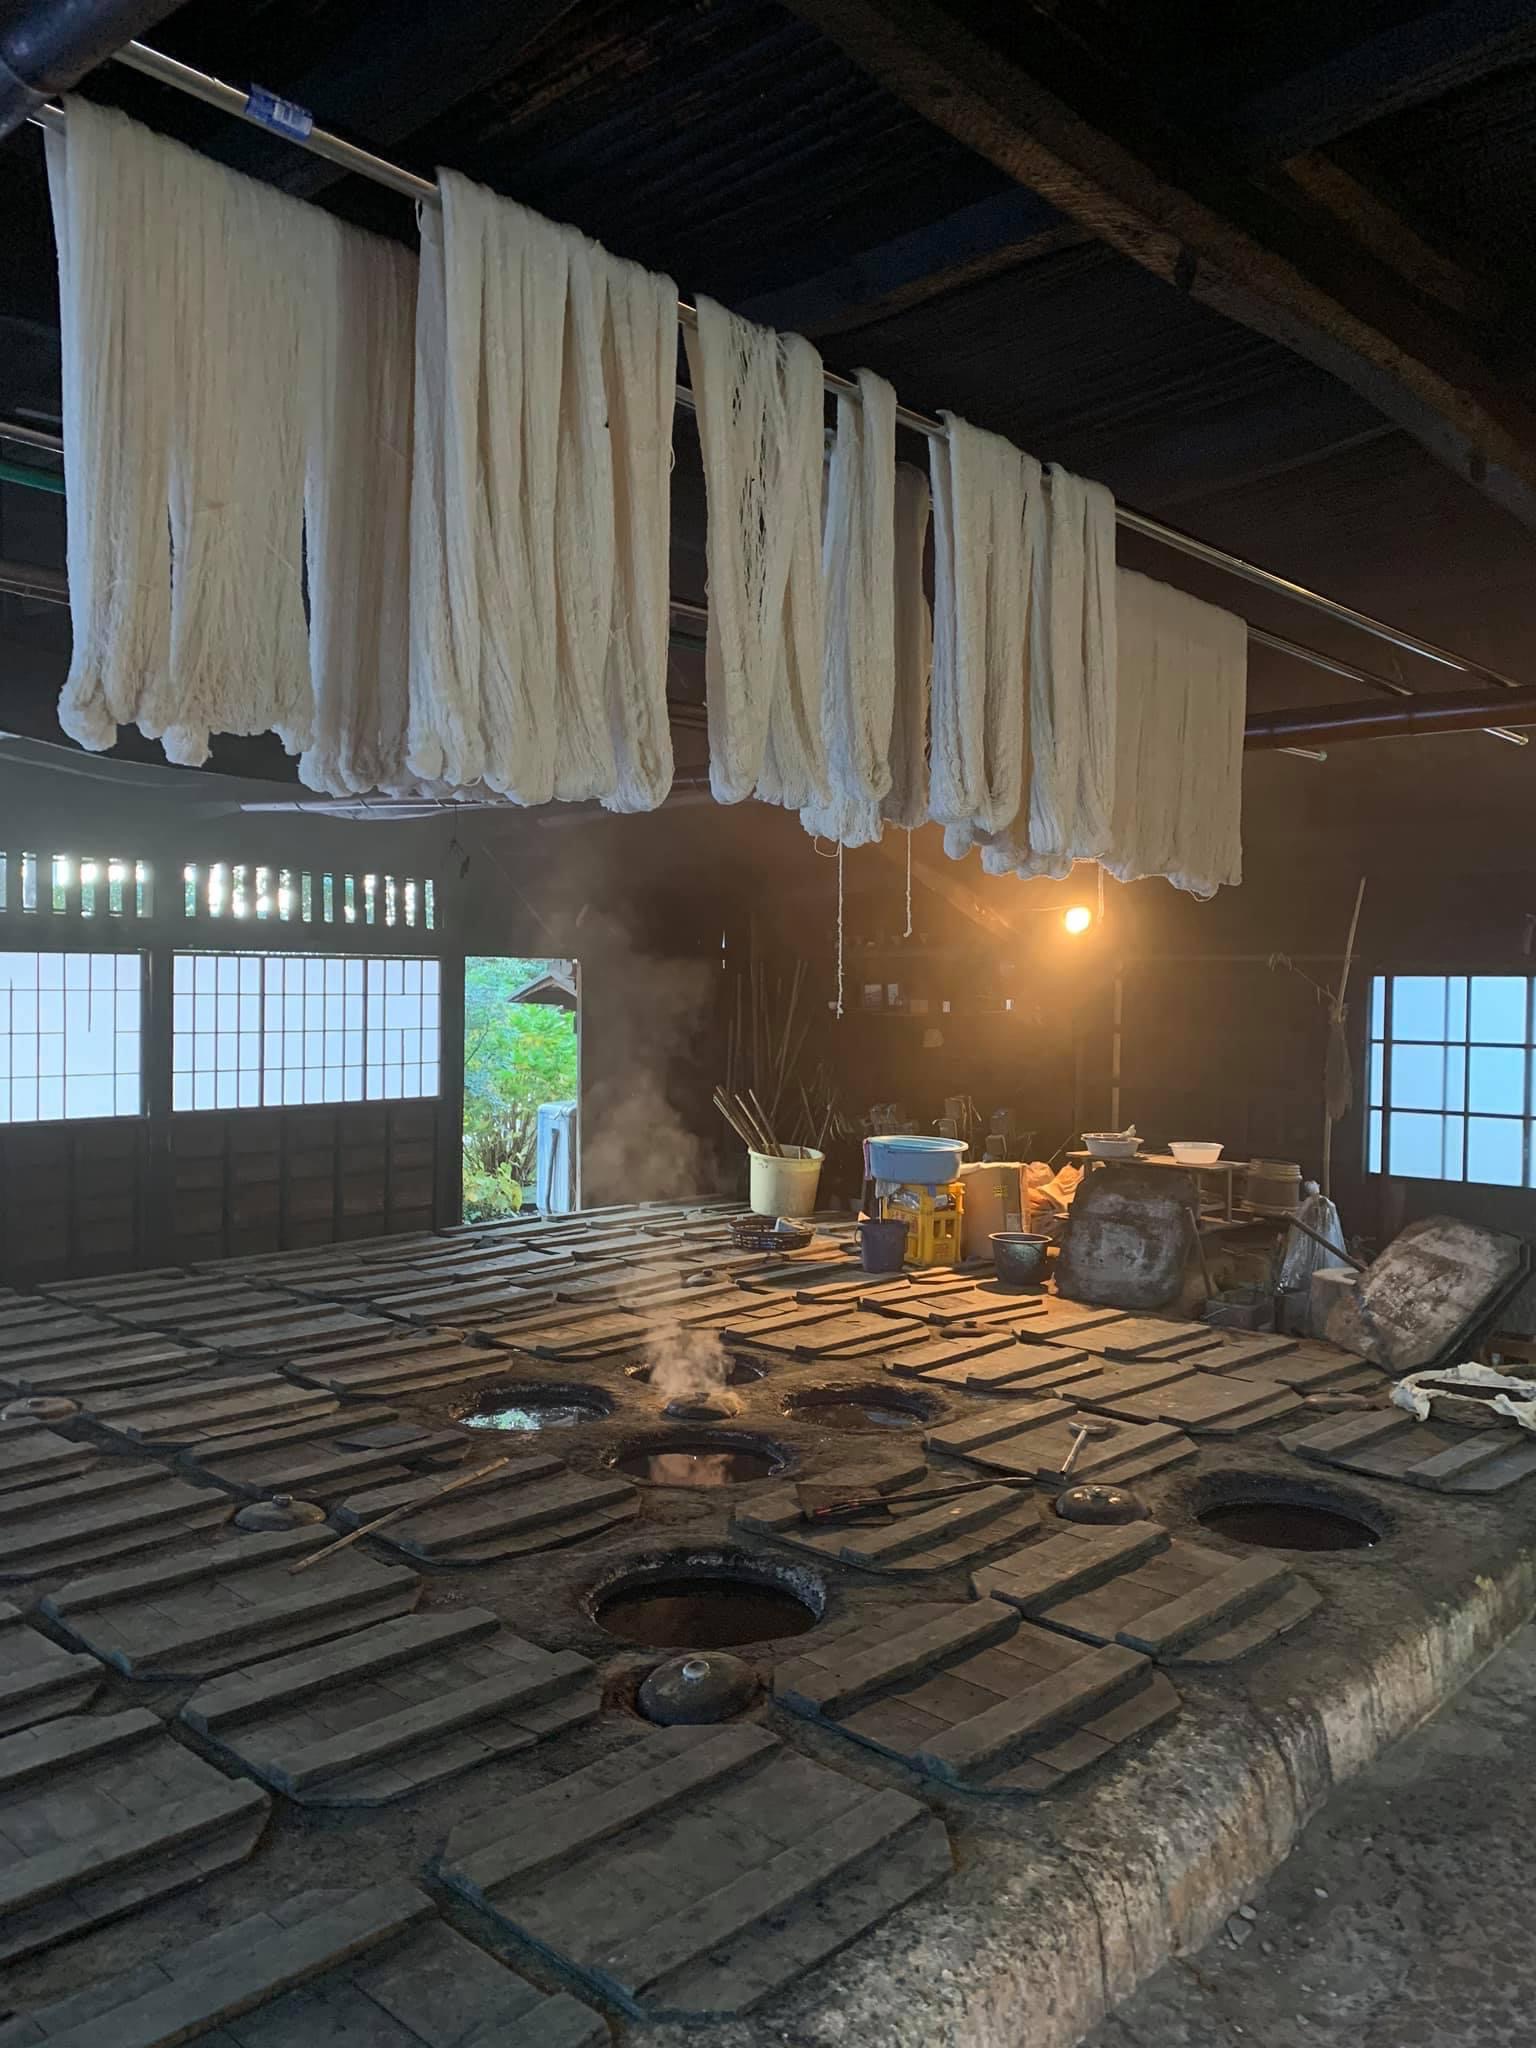 A room in which traditional indigo is being mad, in stone pits in the floor, with wooden covers. White linen thread hangs from the ceiling ready for dying